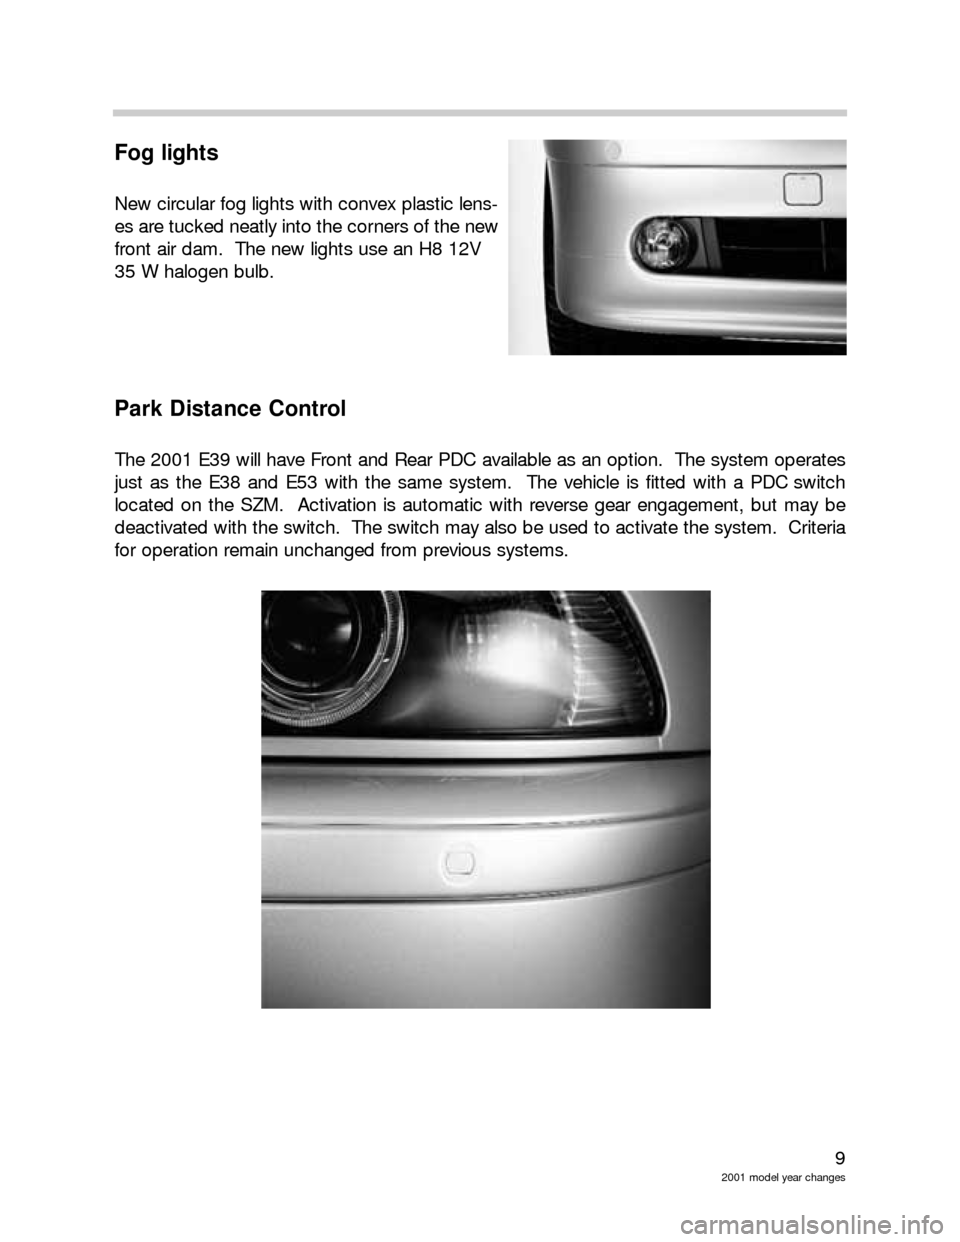 BMW X5 2001 E53 Model Yar Changes 9
2001 model year changes
Fog lights
New circular fog lights with convex plastic lens-
es are tucked neatly into the corners of the new
front air dam.  The new lights use an H8 12V 
35 W halogen bulb.